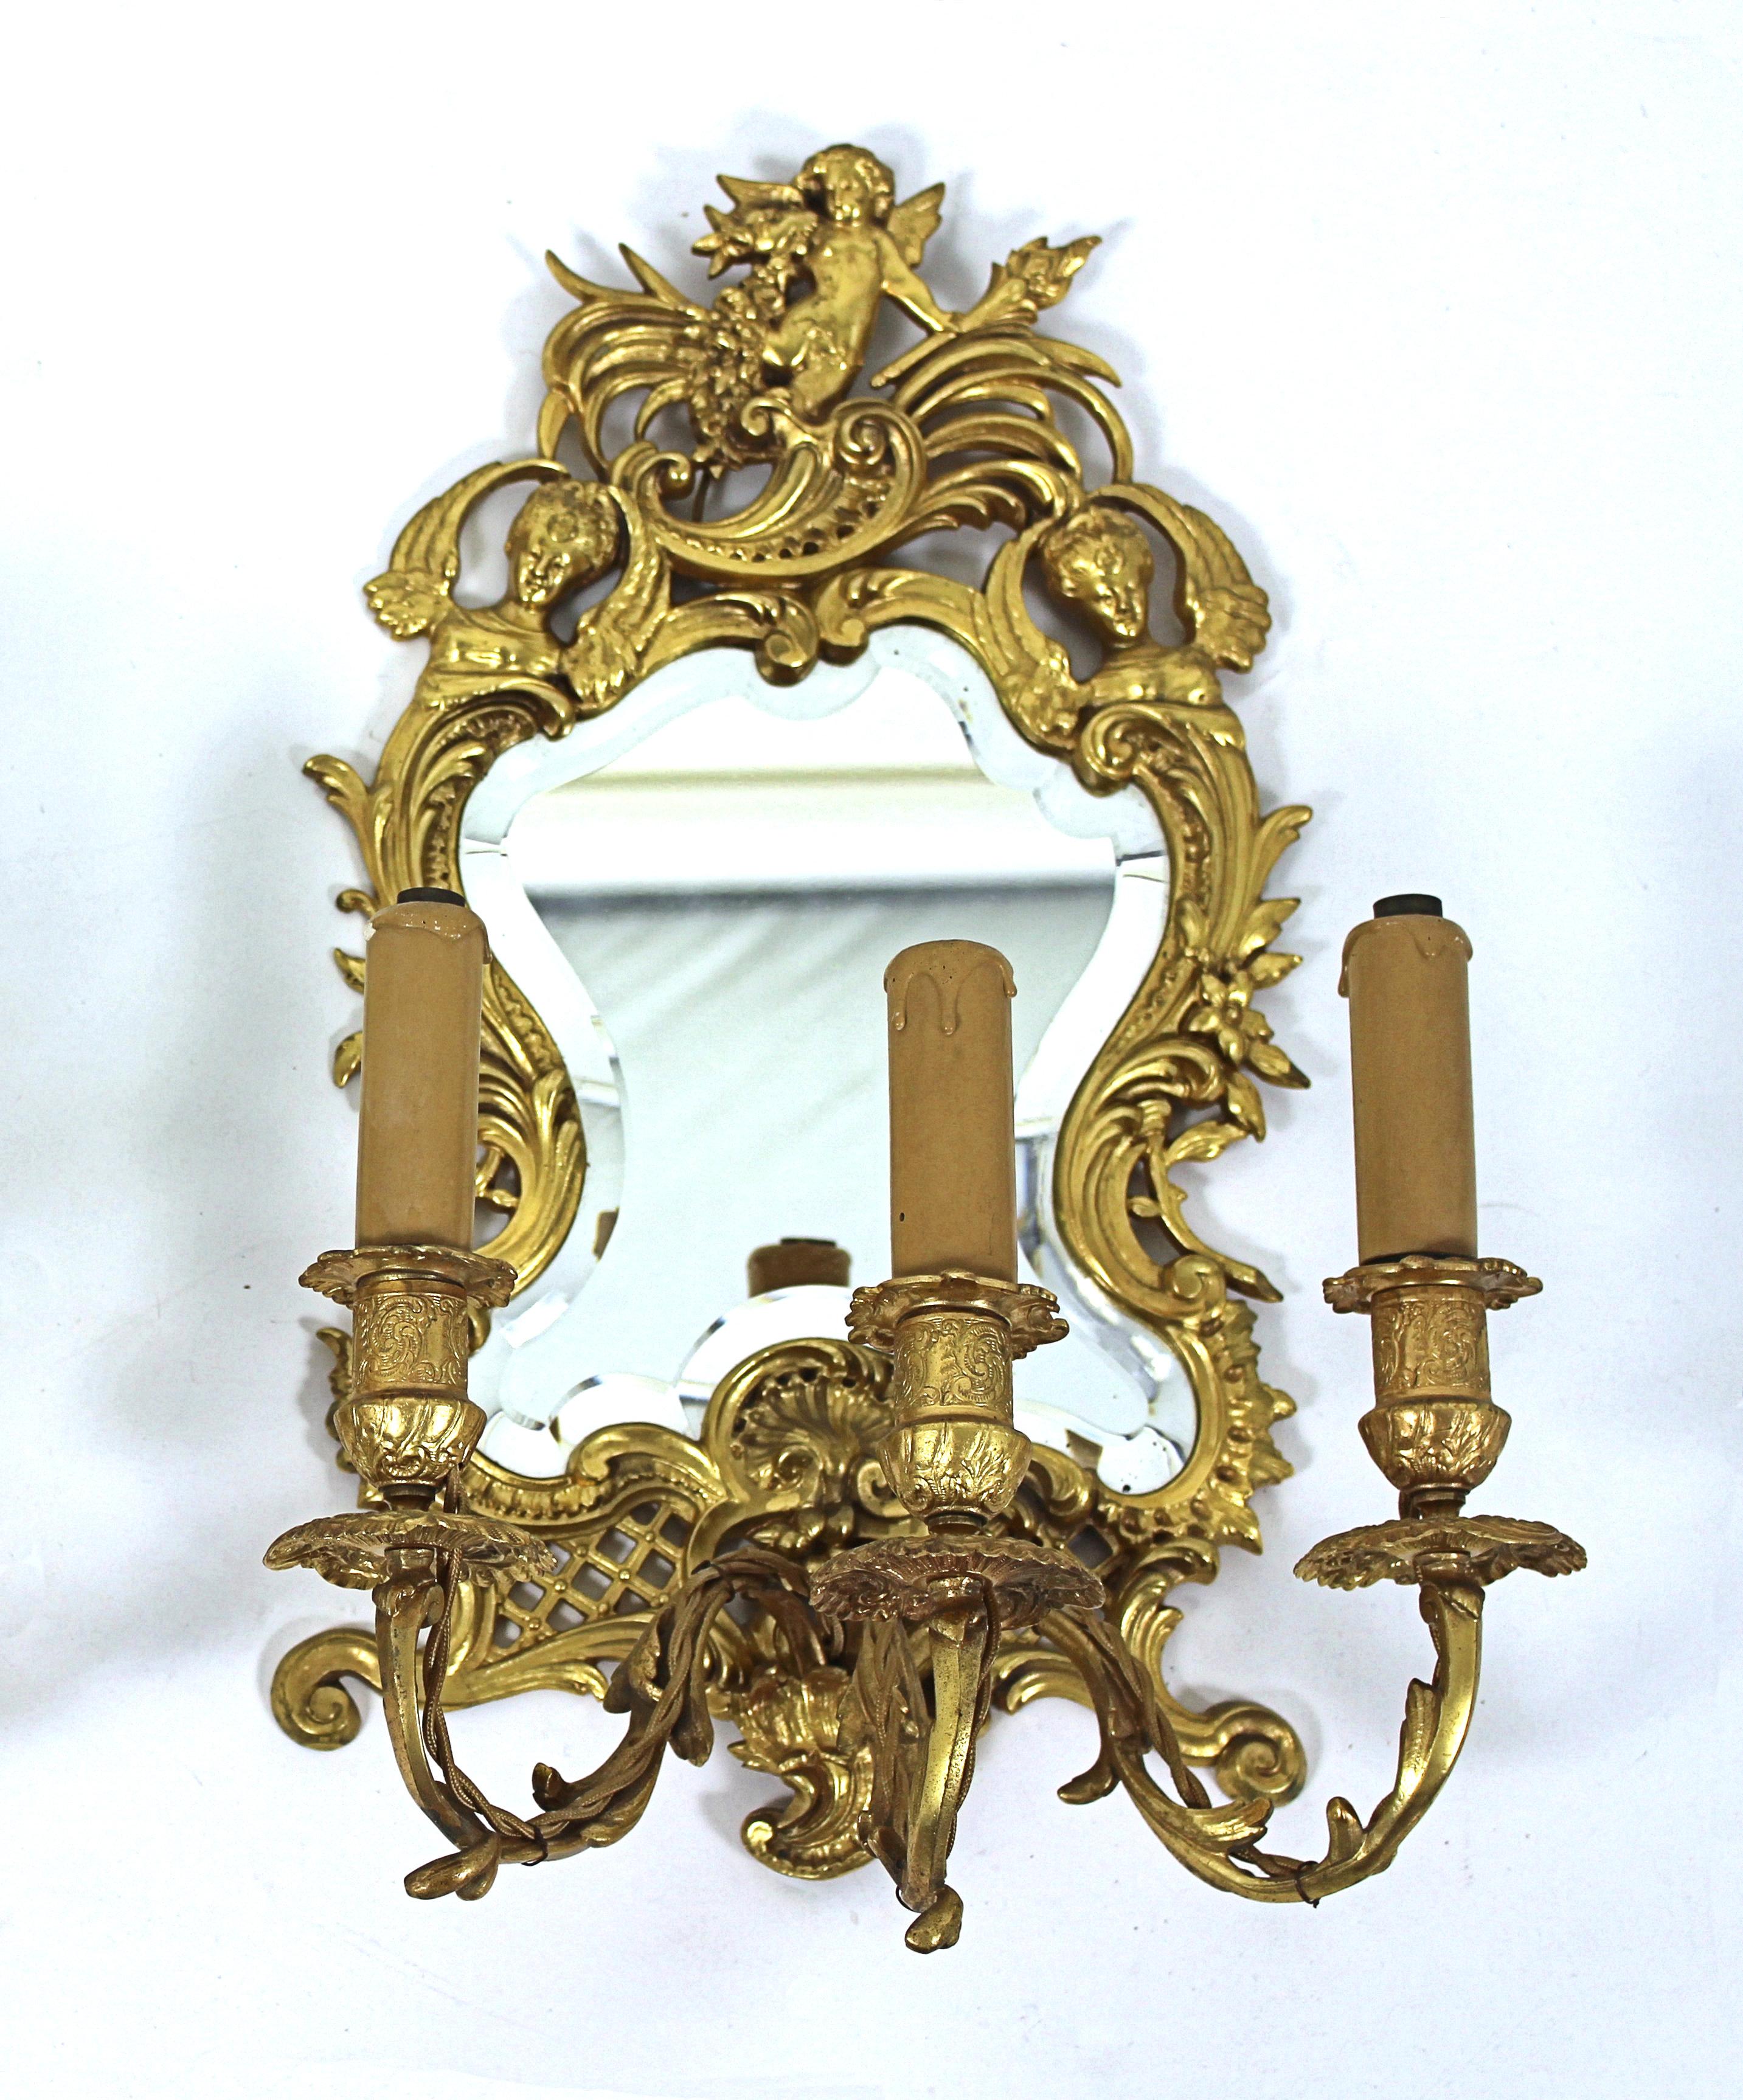 These very attractive and decorative pair of 19th century French ormolu Girondelles that have been fitted for electricity are decorated with winged figures and feature 3 candelabra arms with candlestick motifs. The shaped mirror backs are bevelled